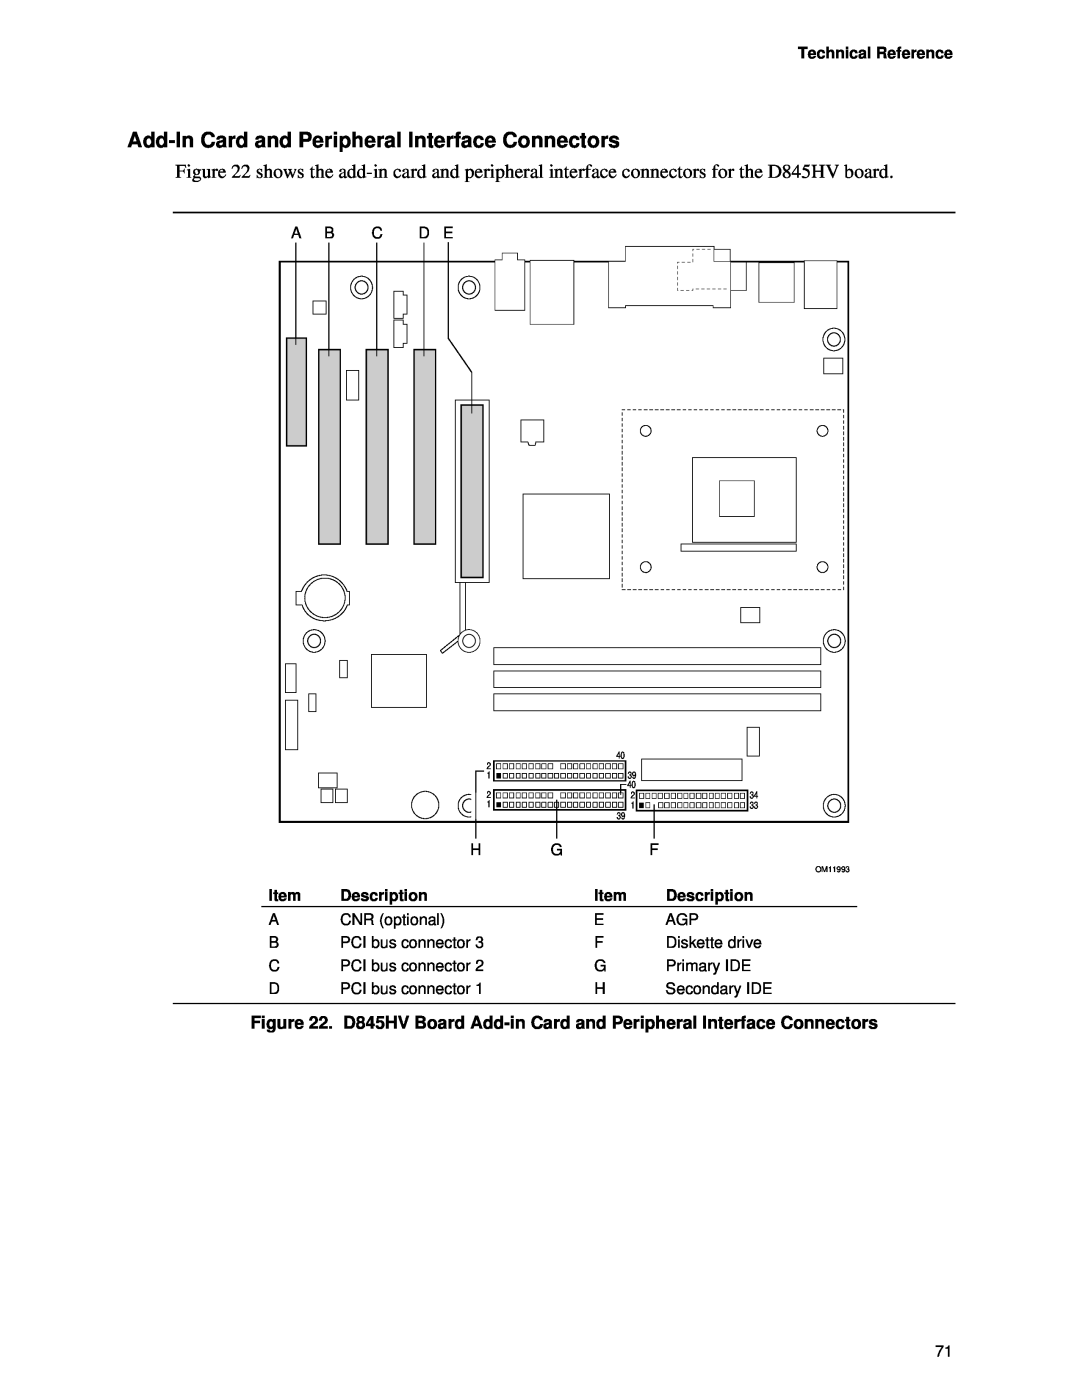 Intel D845HV, D845WN manual Add-In Card and Peripheral Interface Connectors, Technical Reference, Description, OM11993 